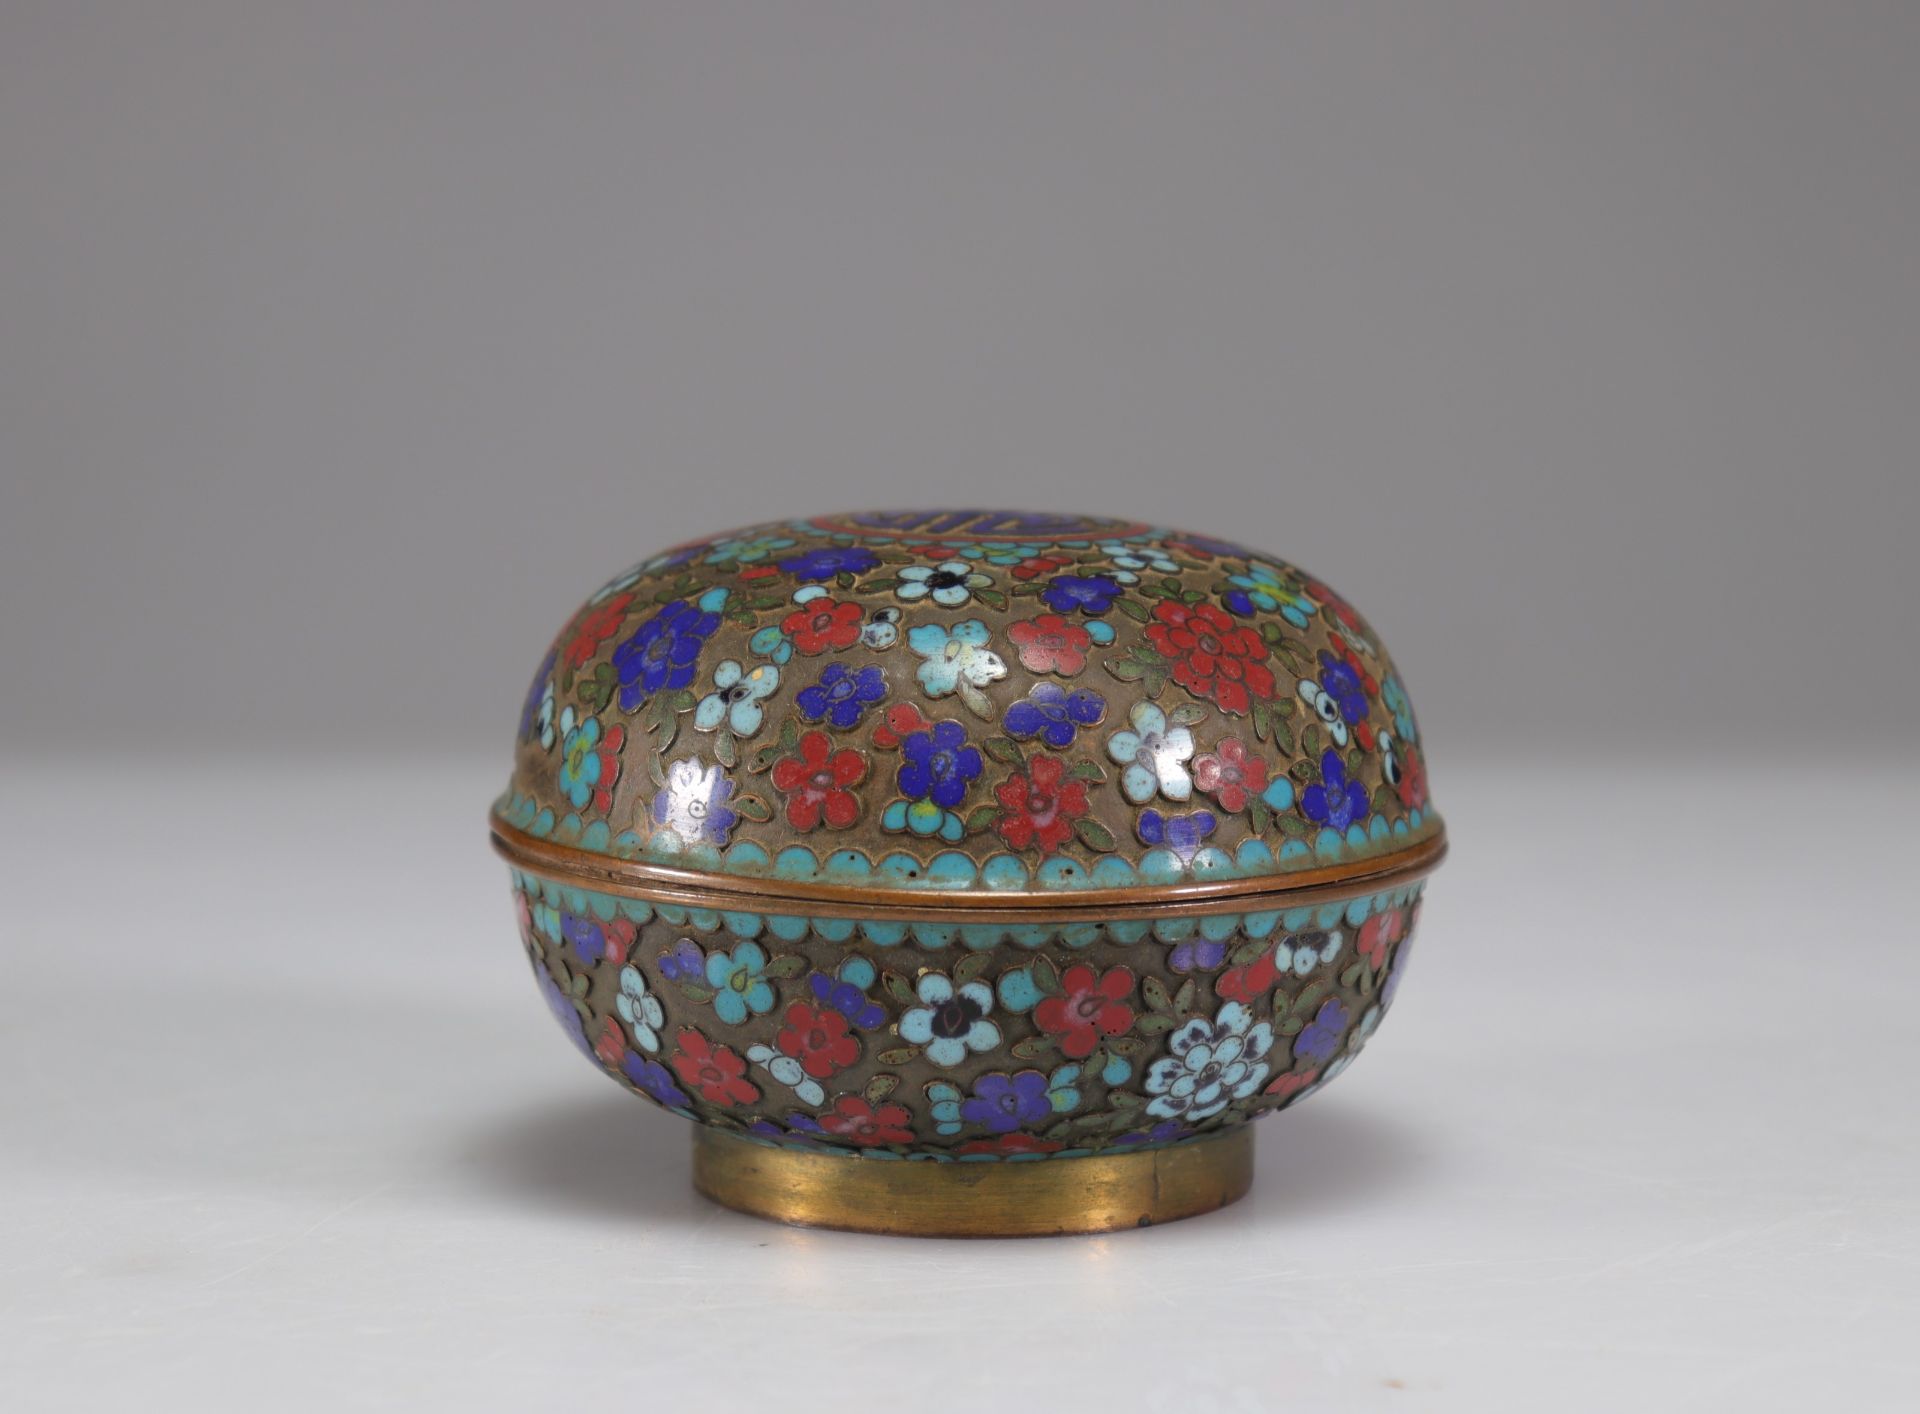 Box covered in cloisonne bonze - Image 3 of 4